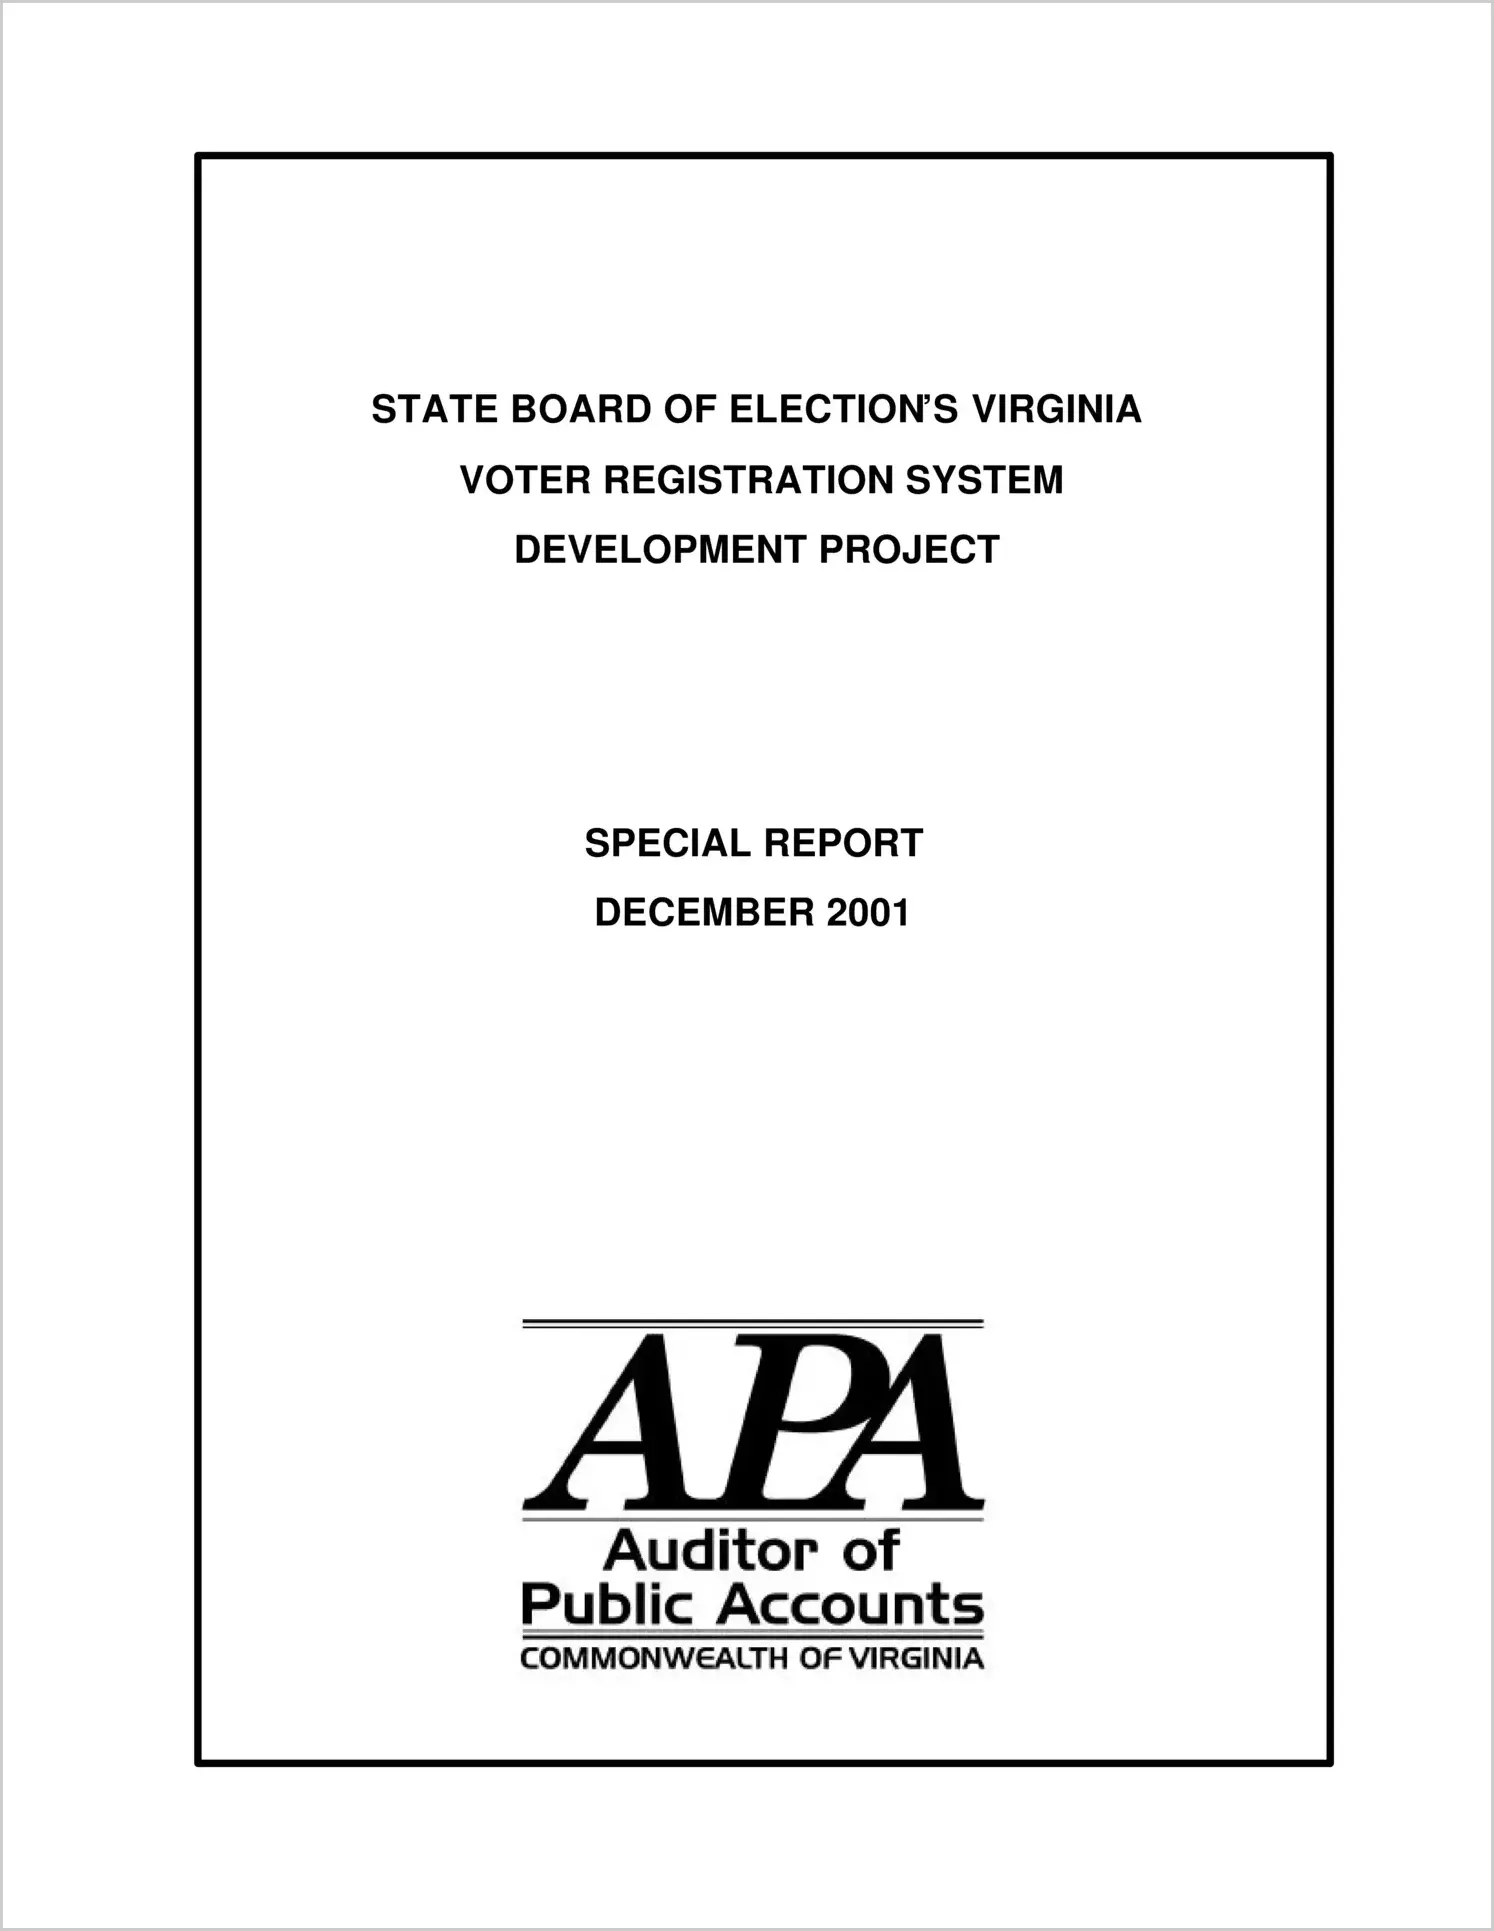 Special ReportState Board of Election`s Virginia Voter Registration System Development Project(Report Date: 12/18/2001)